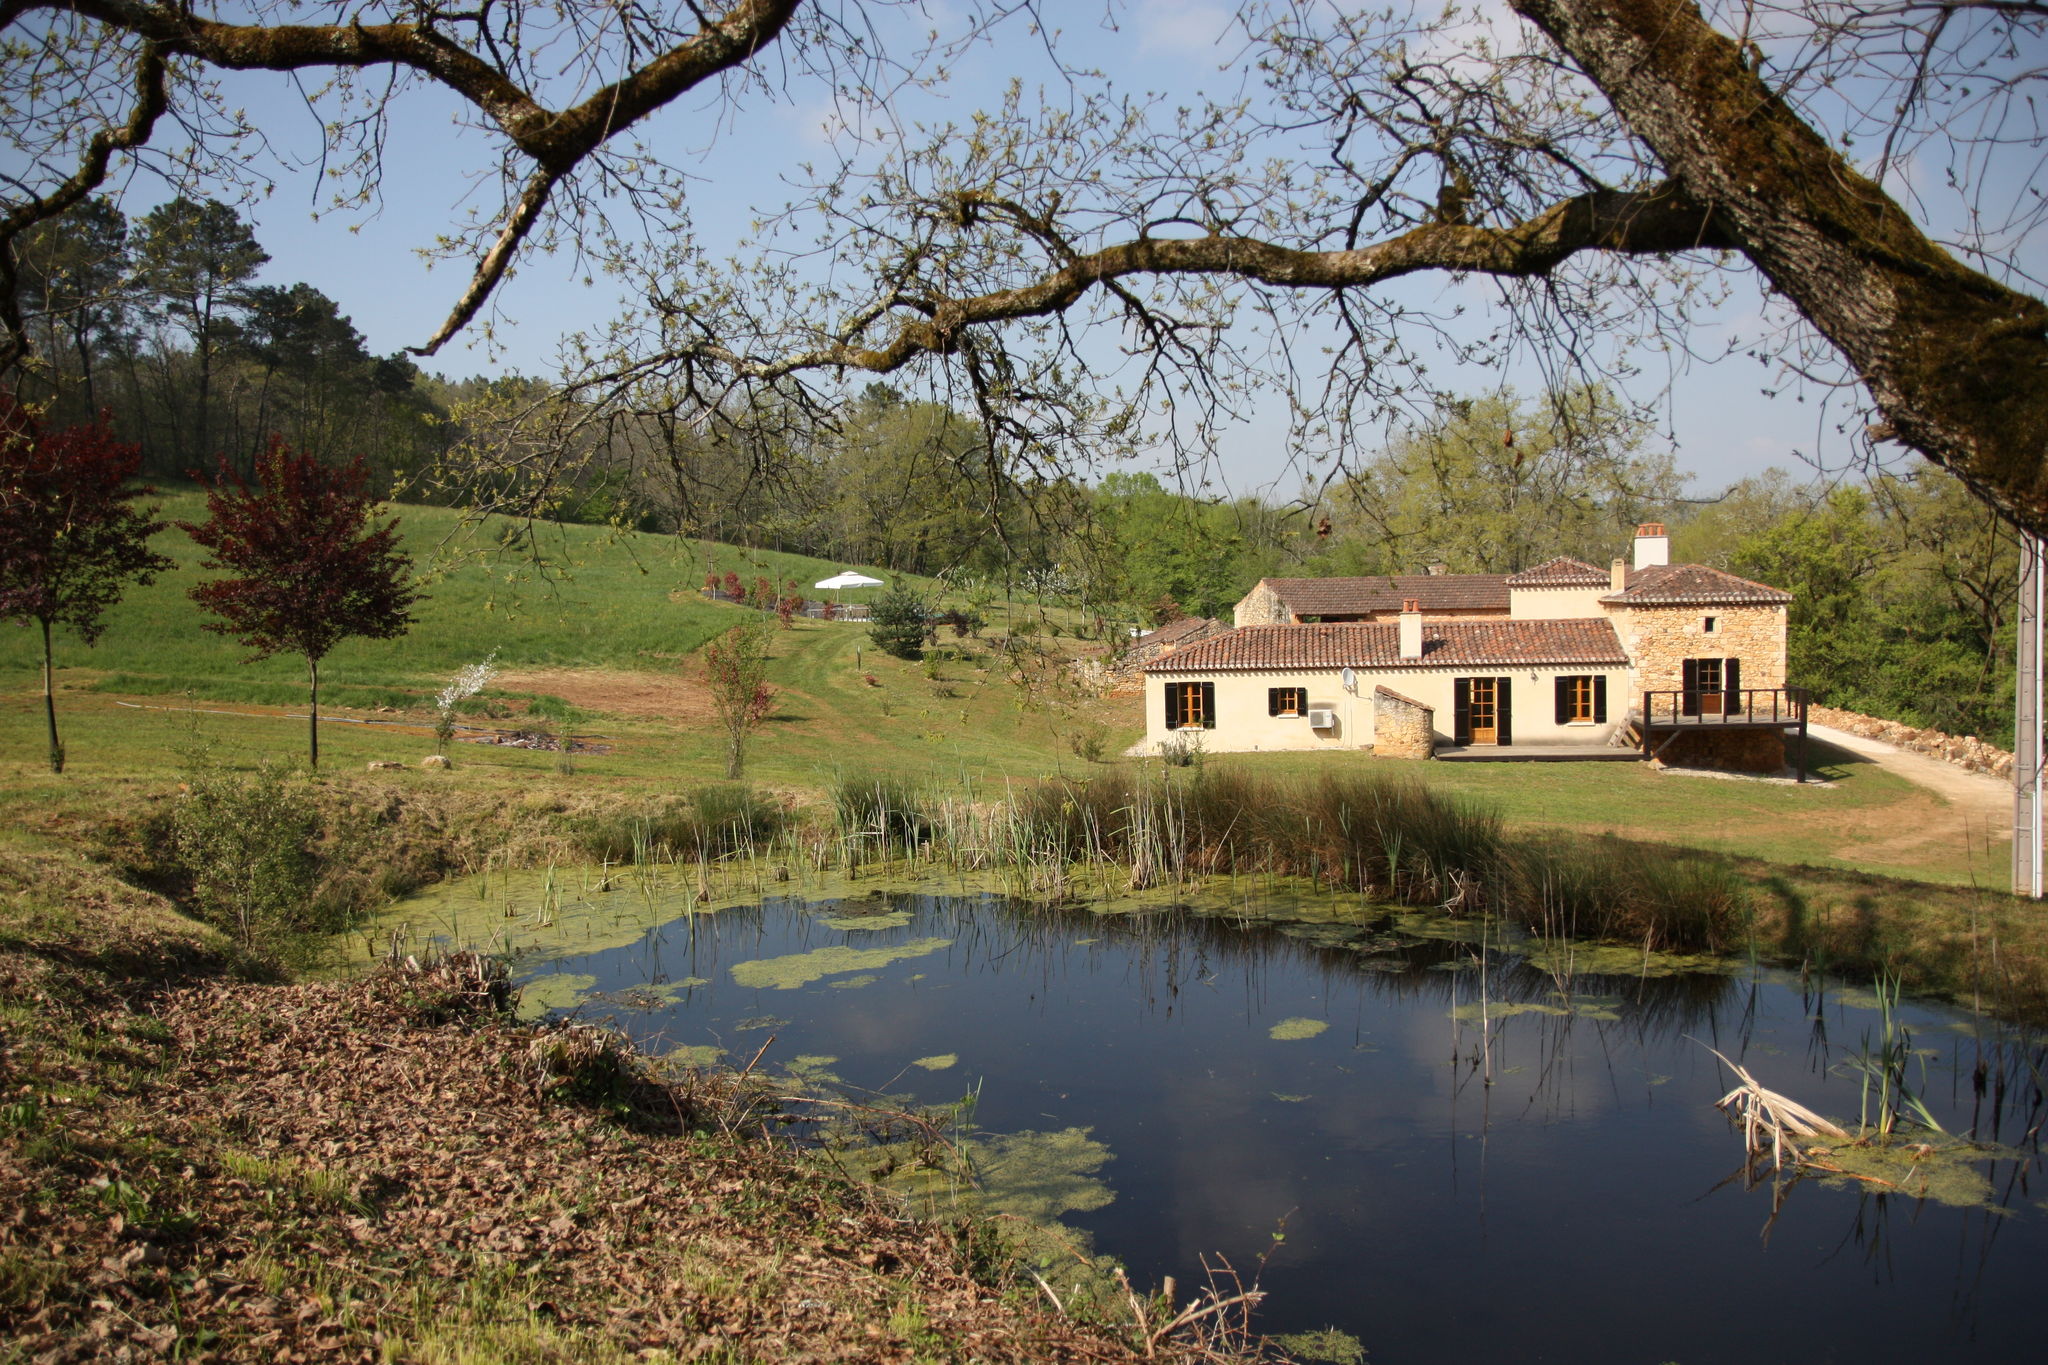 Charming holiday home with private swimming pool and fish pond.